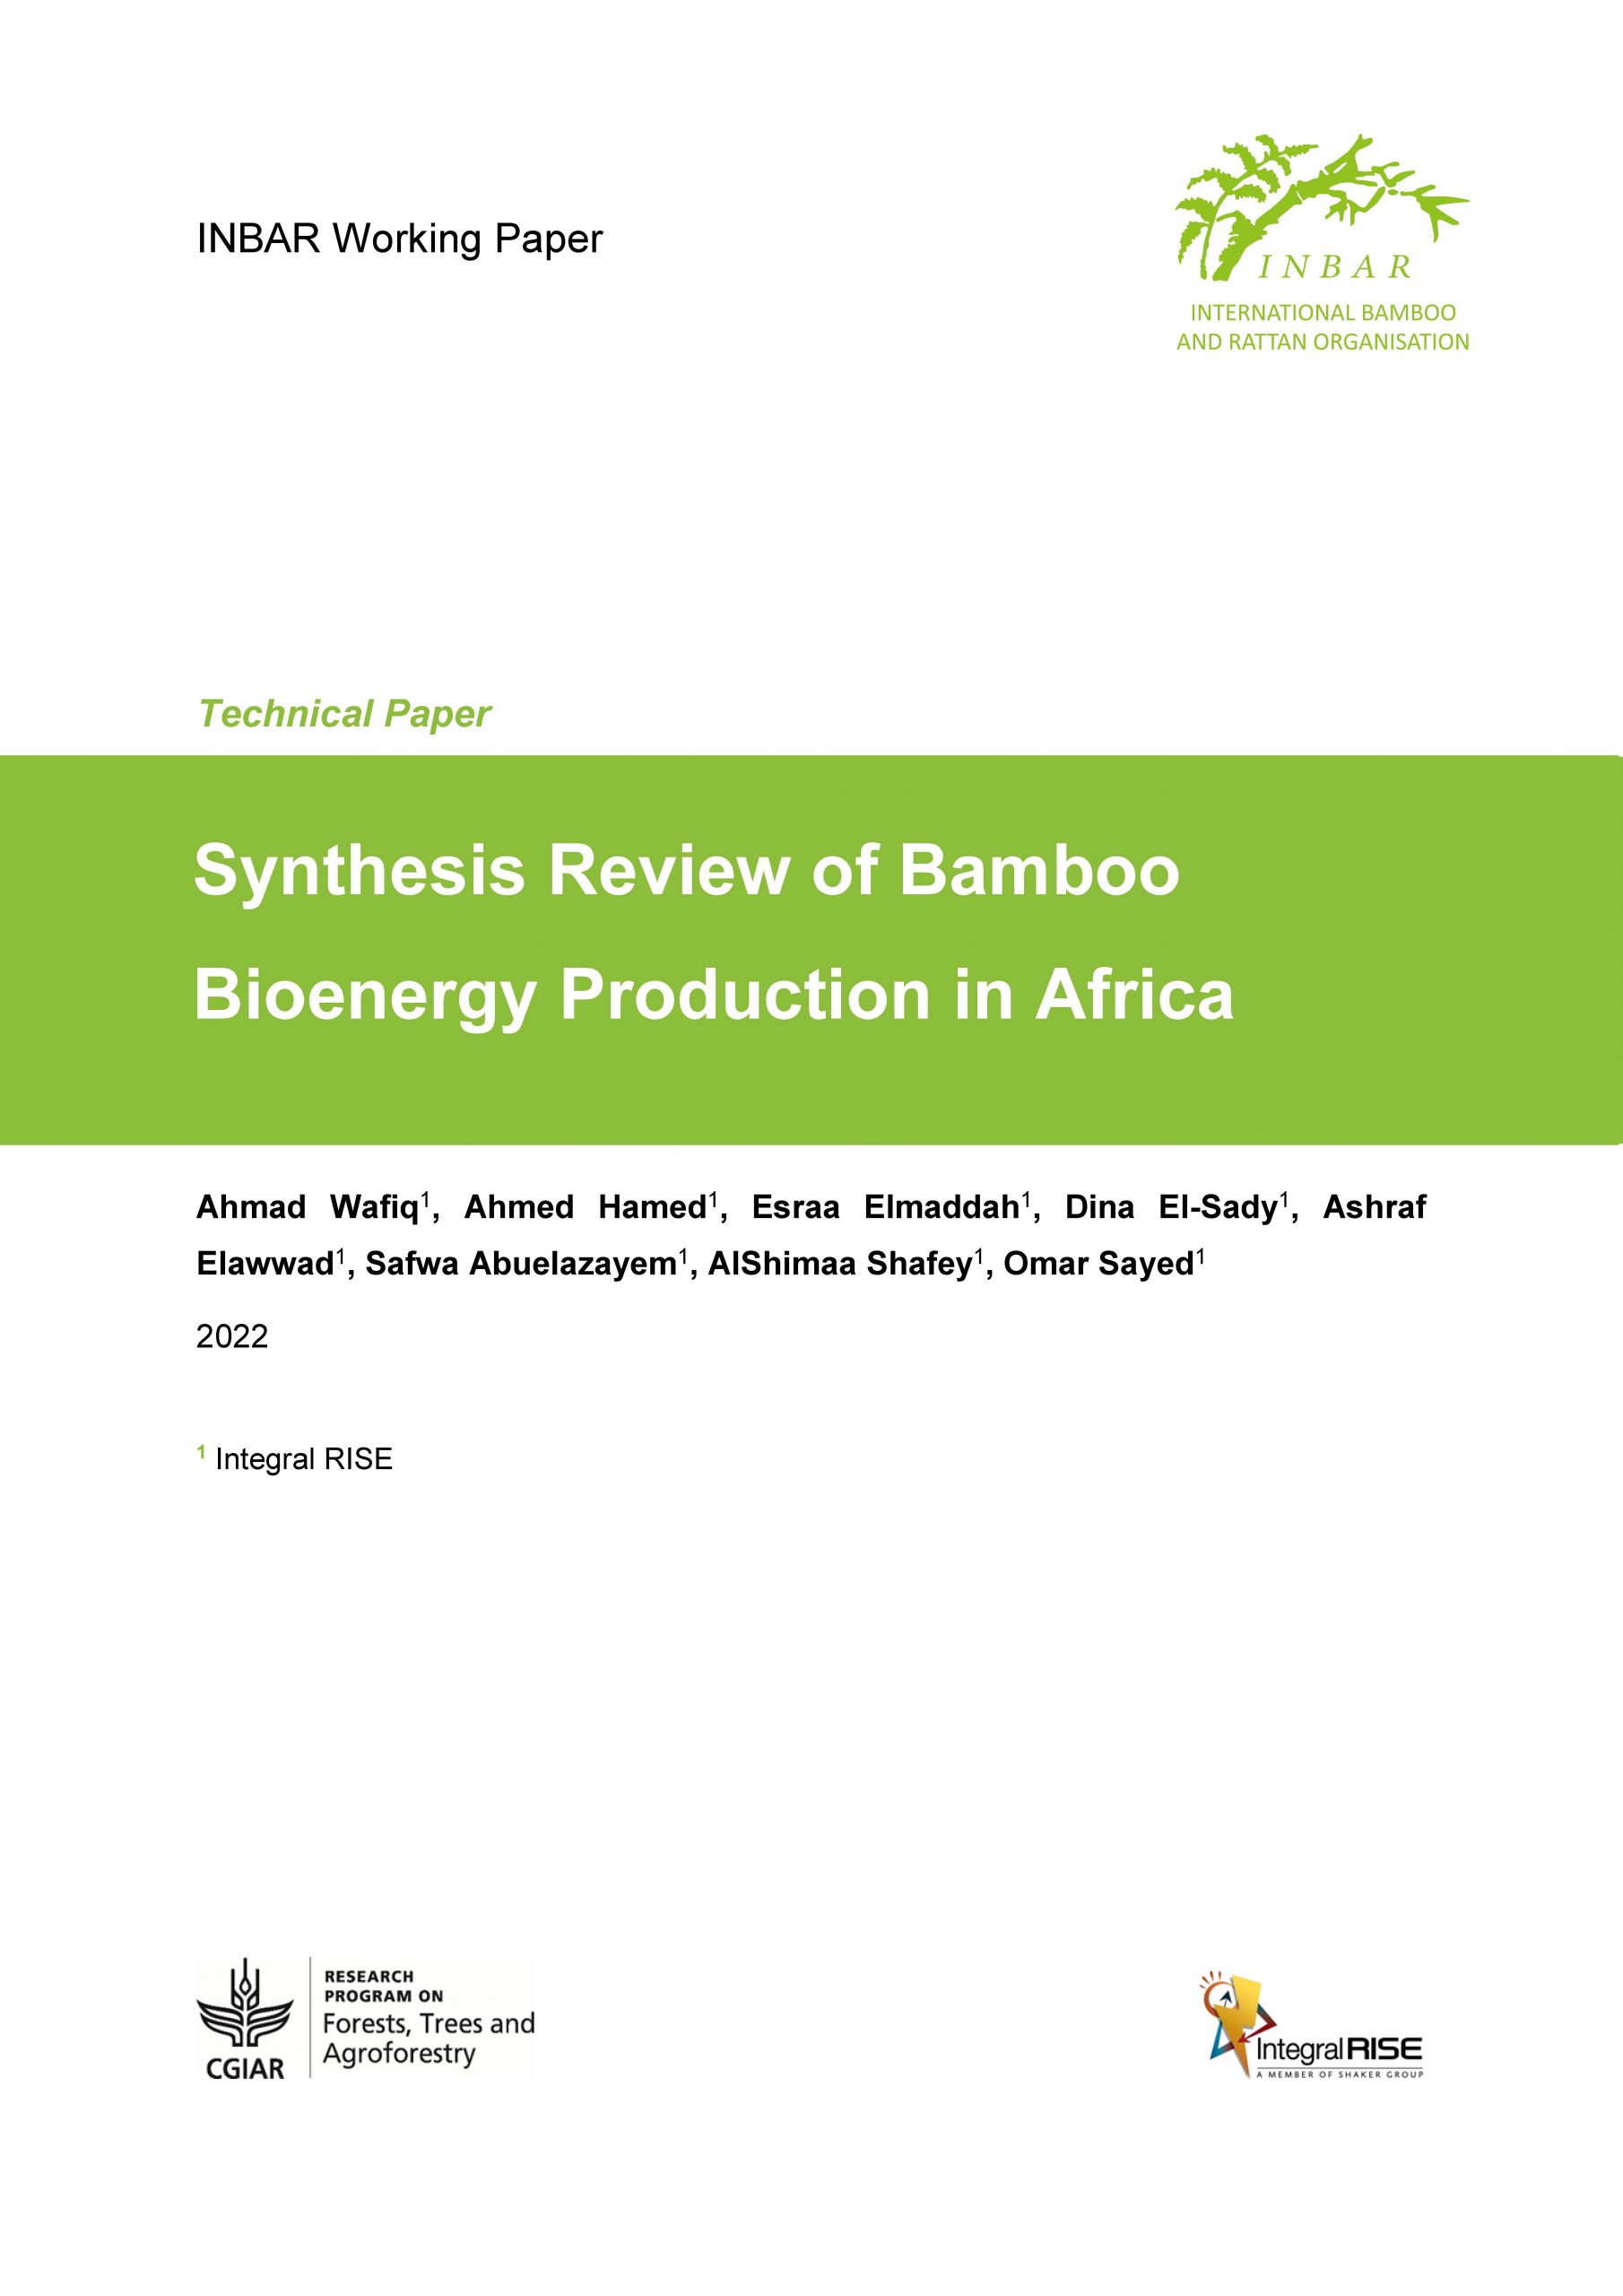 Synthesis Review of Bamboo Bioenergy Production in Africa